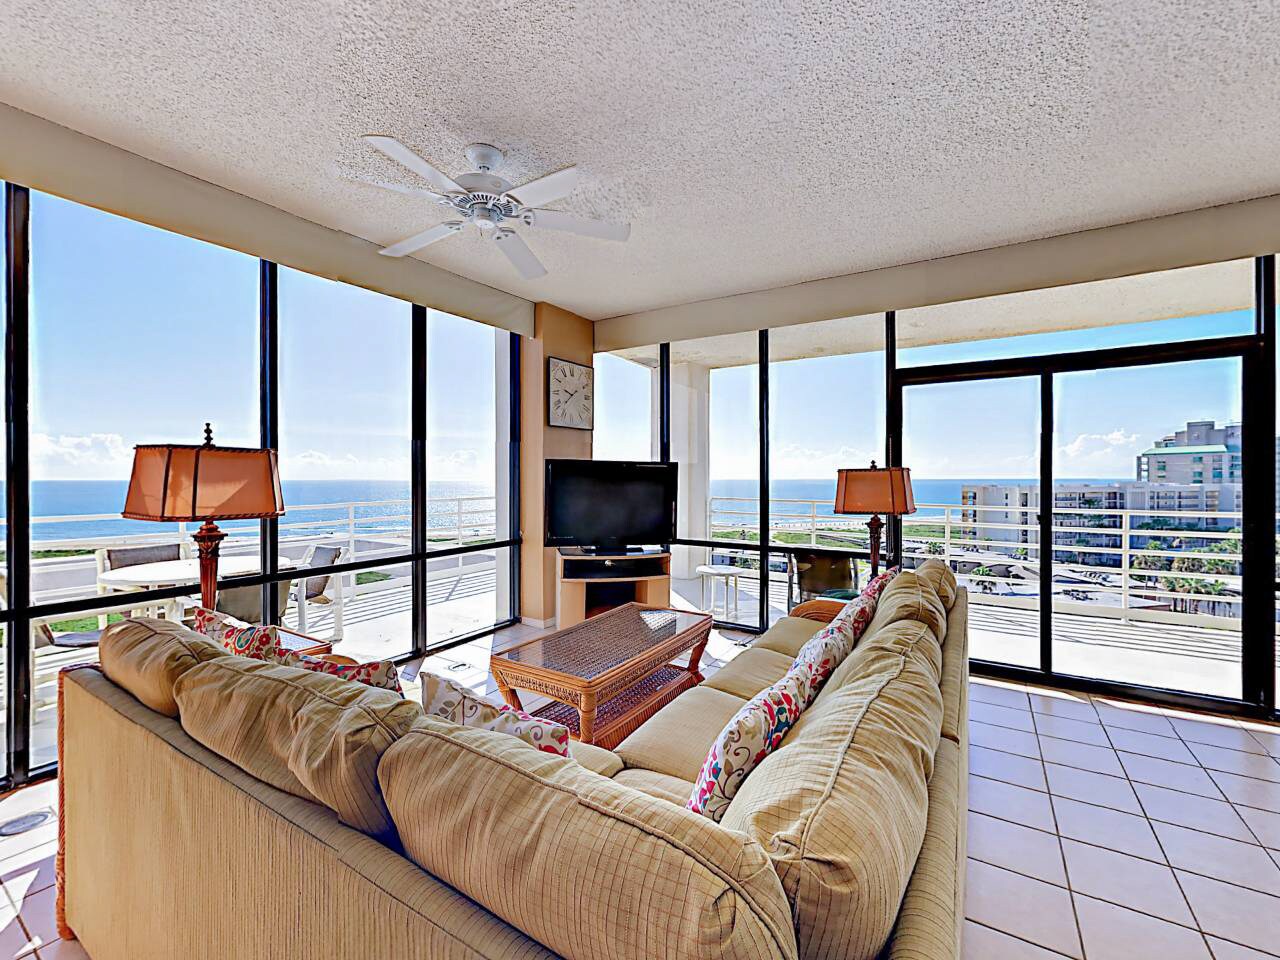 Welcome to South Padre Island! This condo is professionally managed by TurnKey Vacation Rentals.